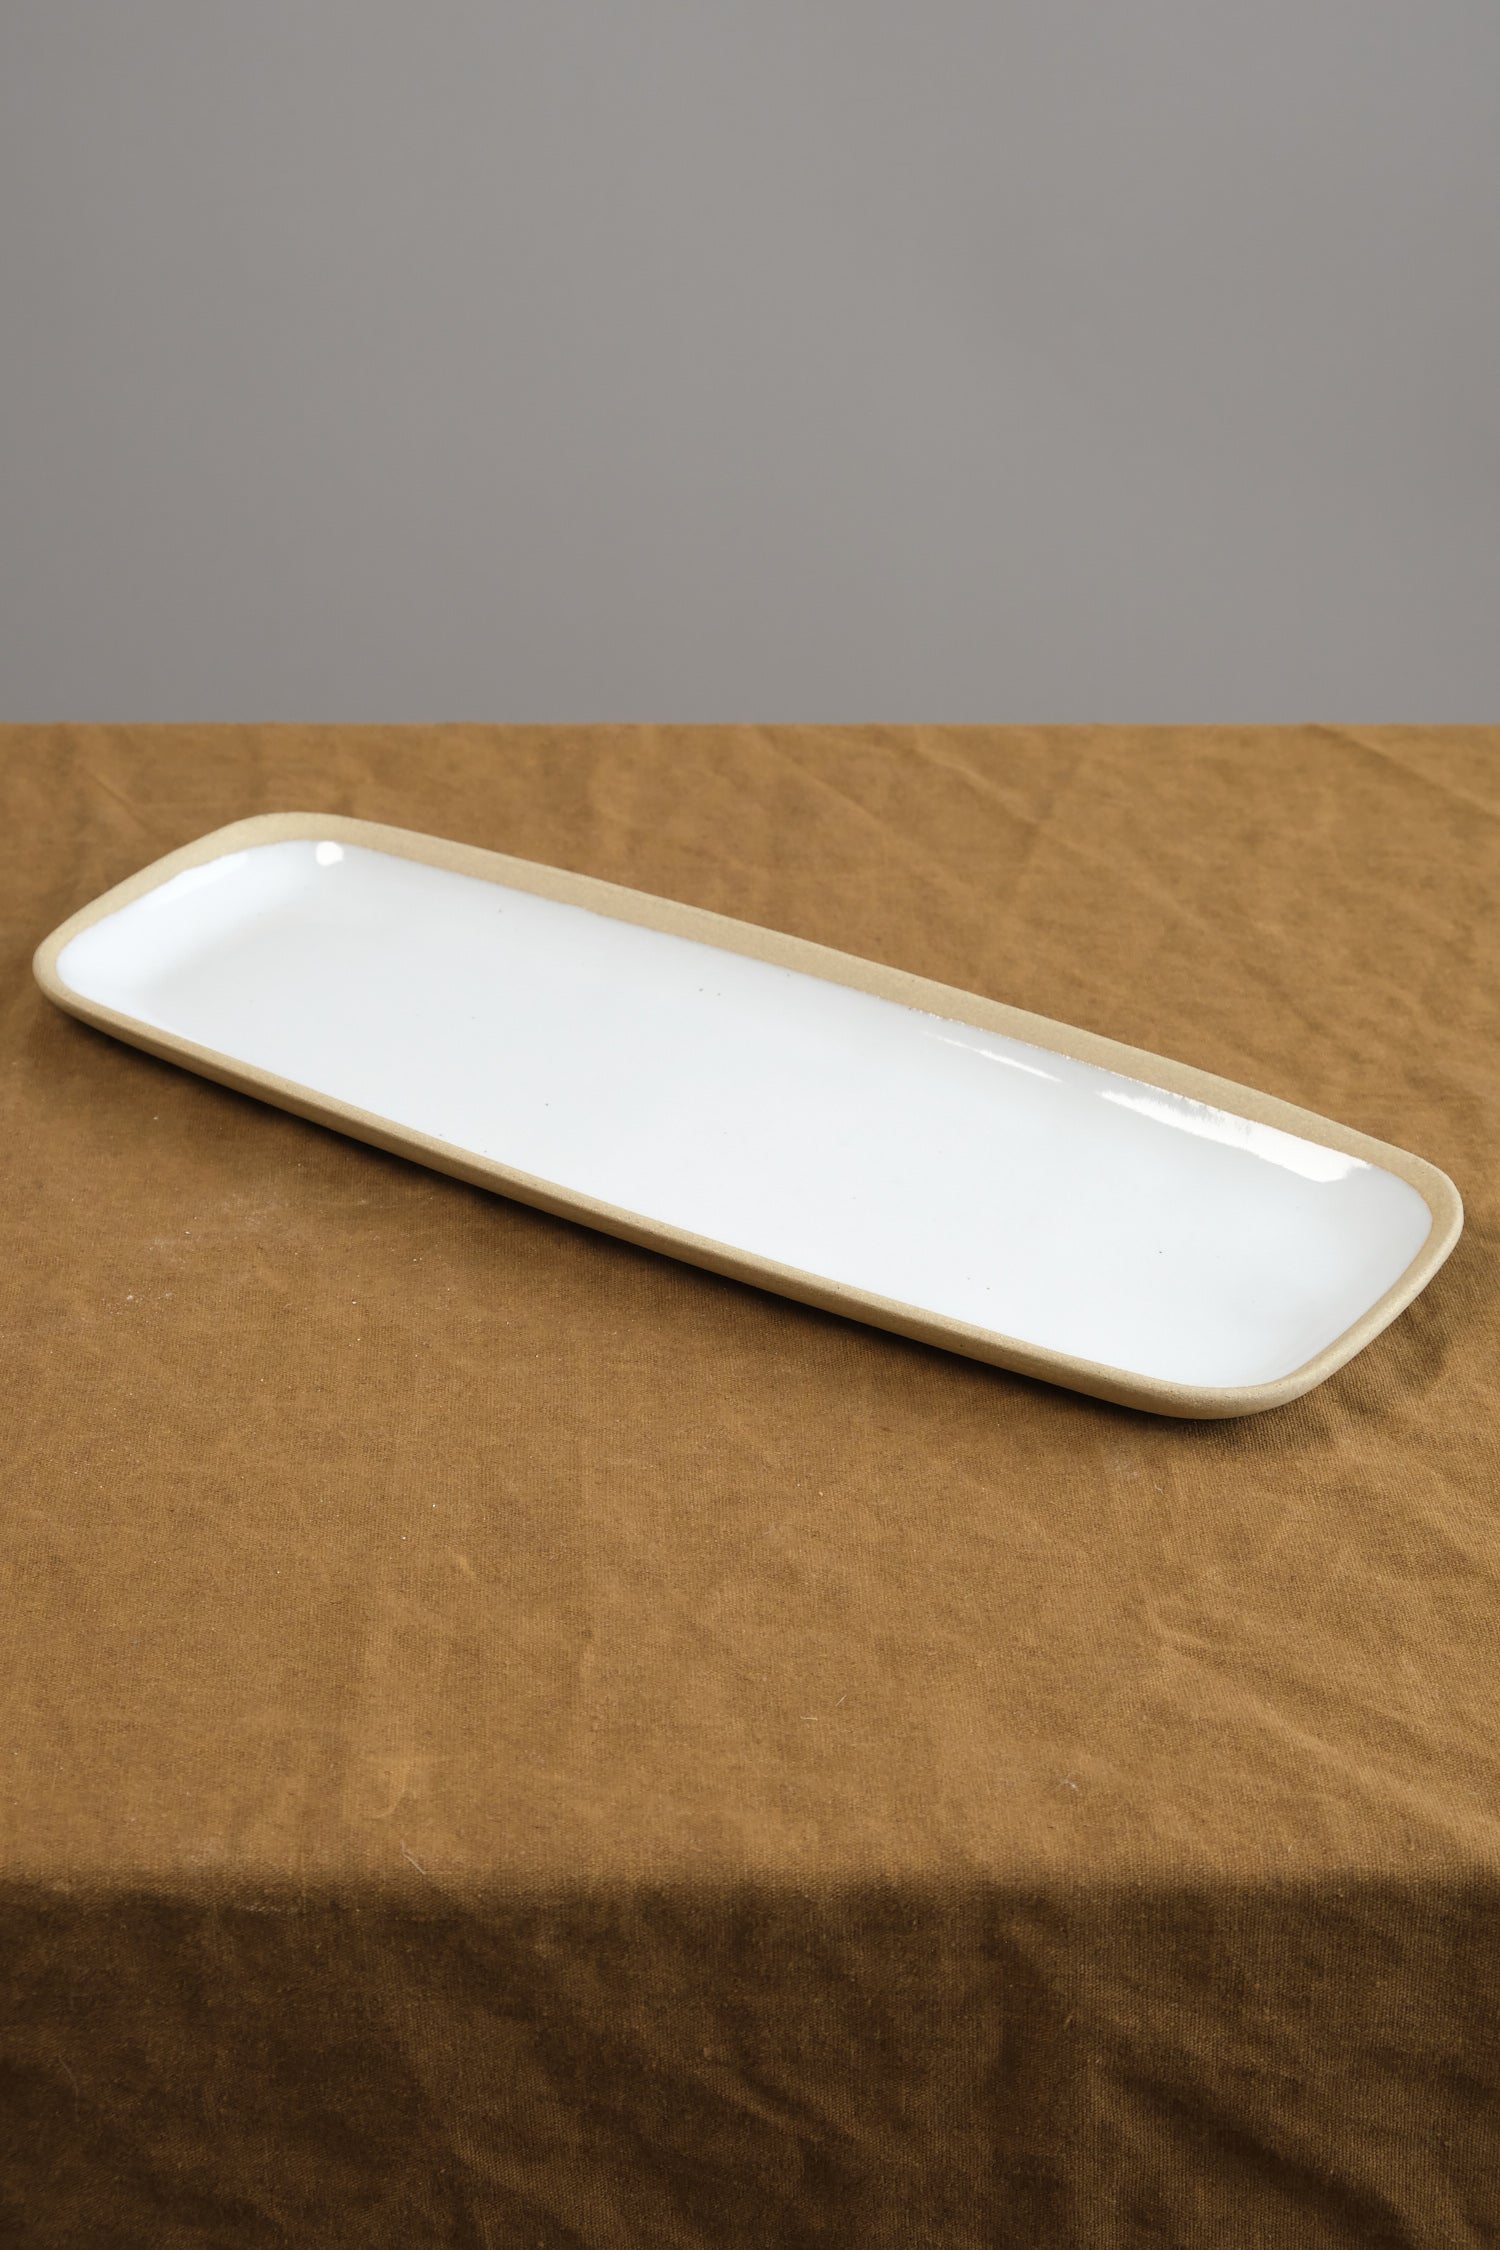 Medium Rectangle Serving Tray on table